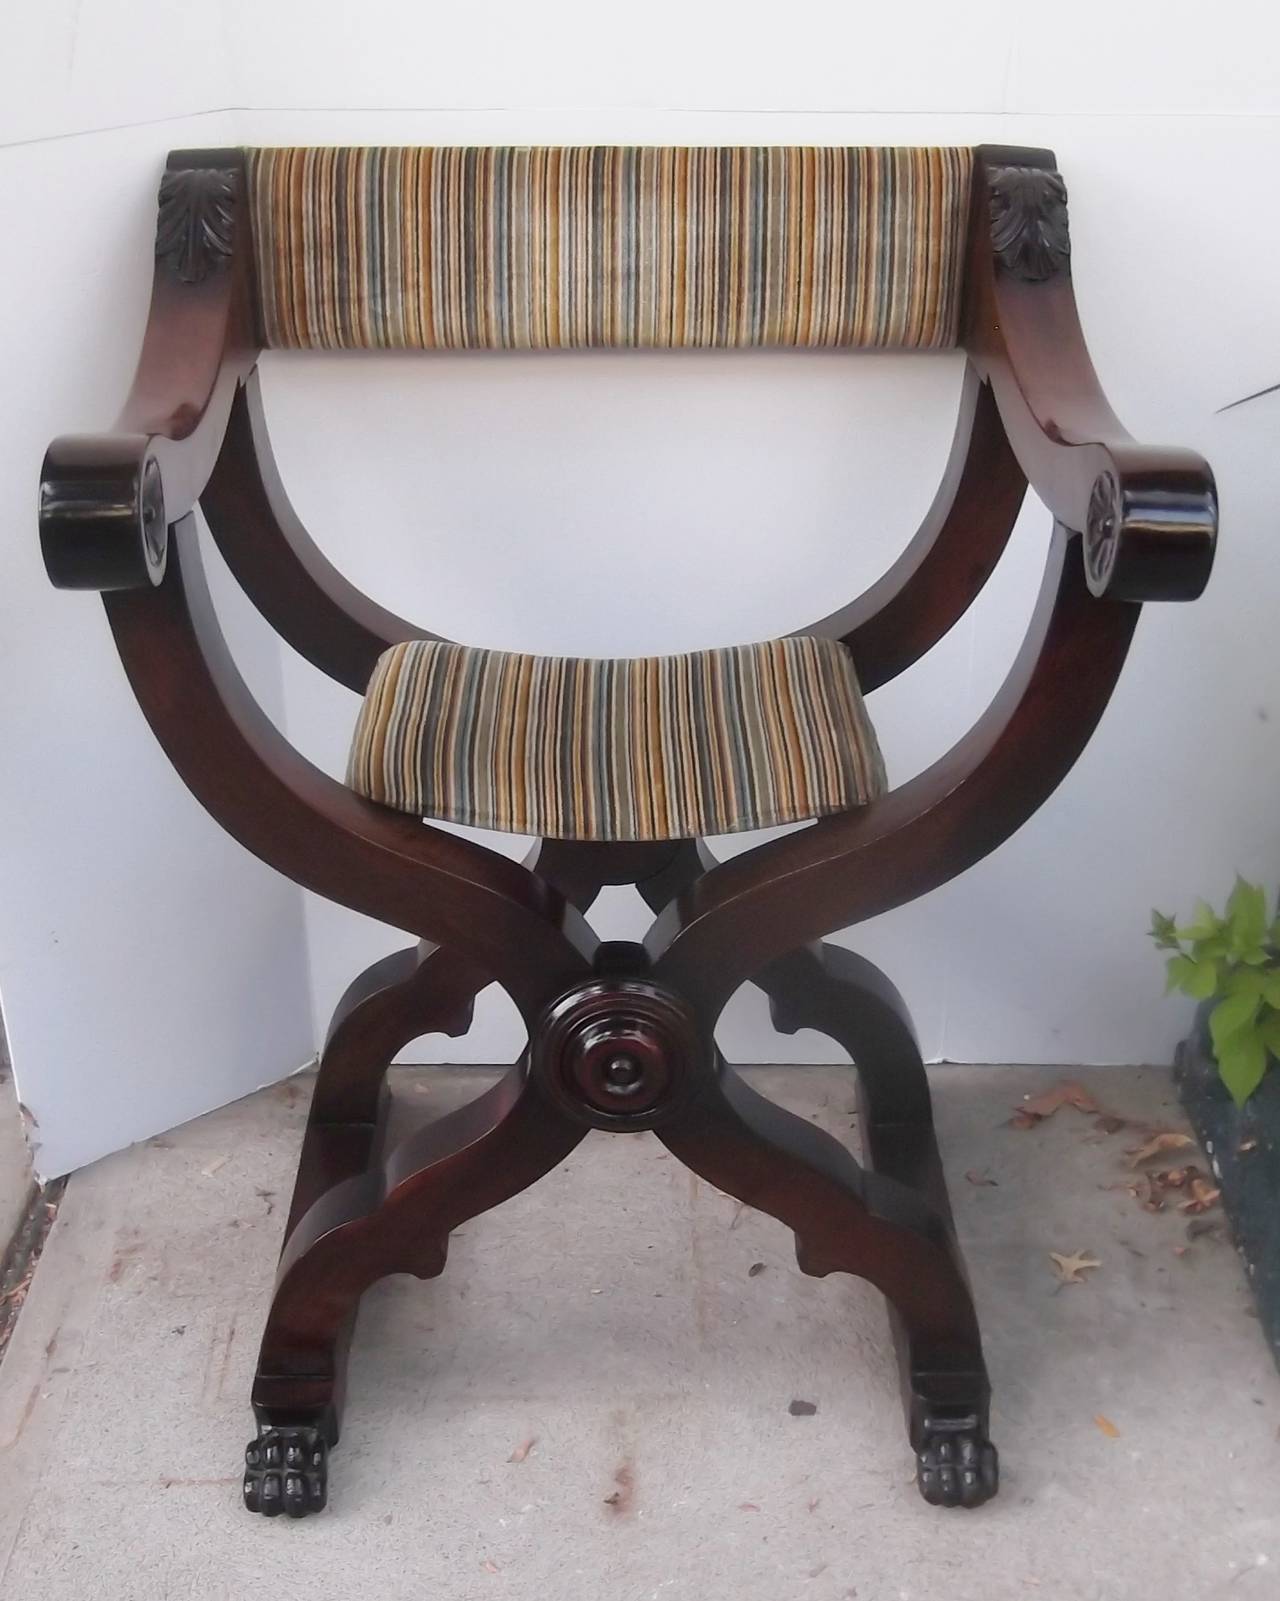 Solid and handsome Savonarola chair also called a 